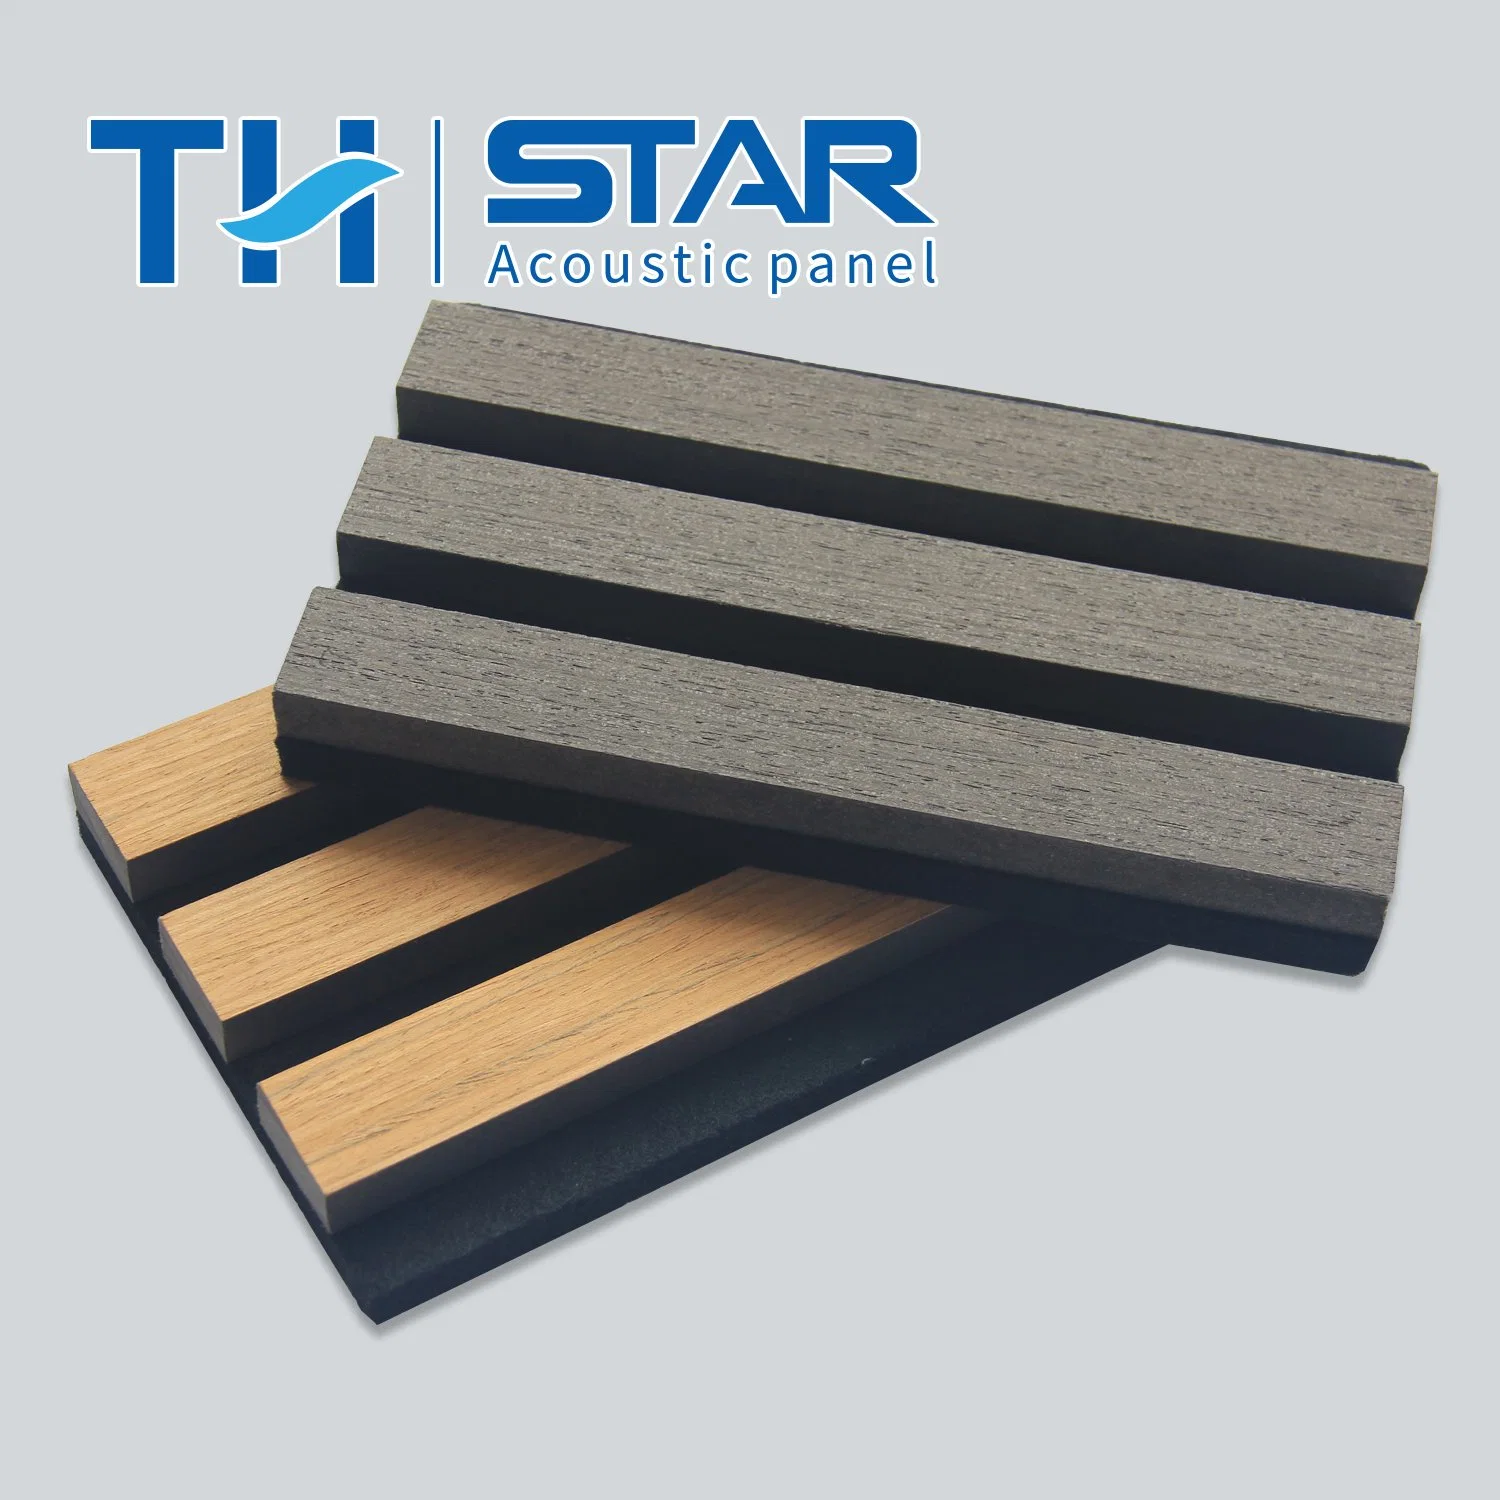 Acoustic Panel Wooden Soundproof Acoustic Slat Wood Wall Panels Decorative Polyester Fiber Acoustical Room Divider